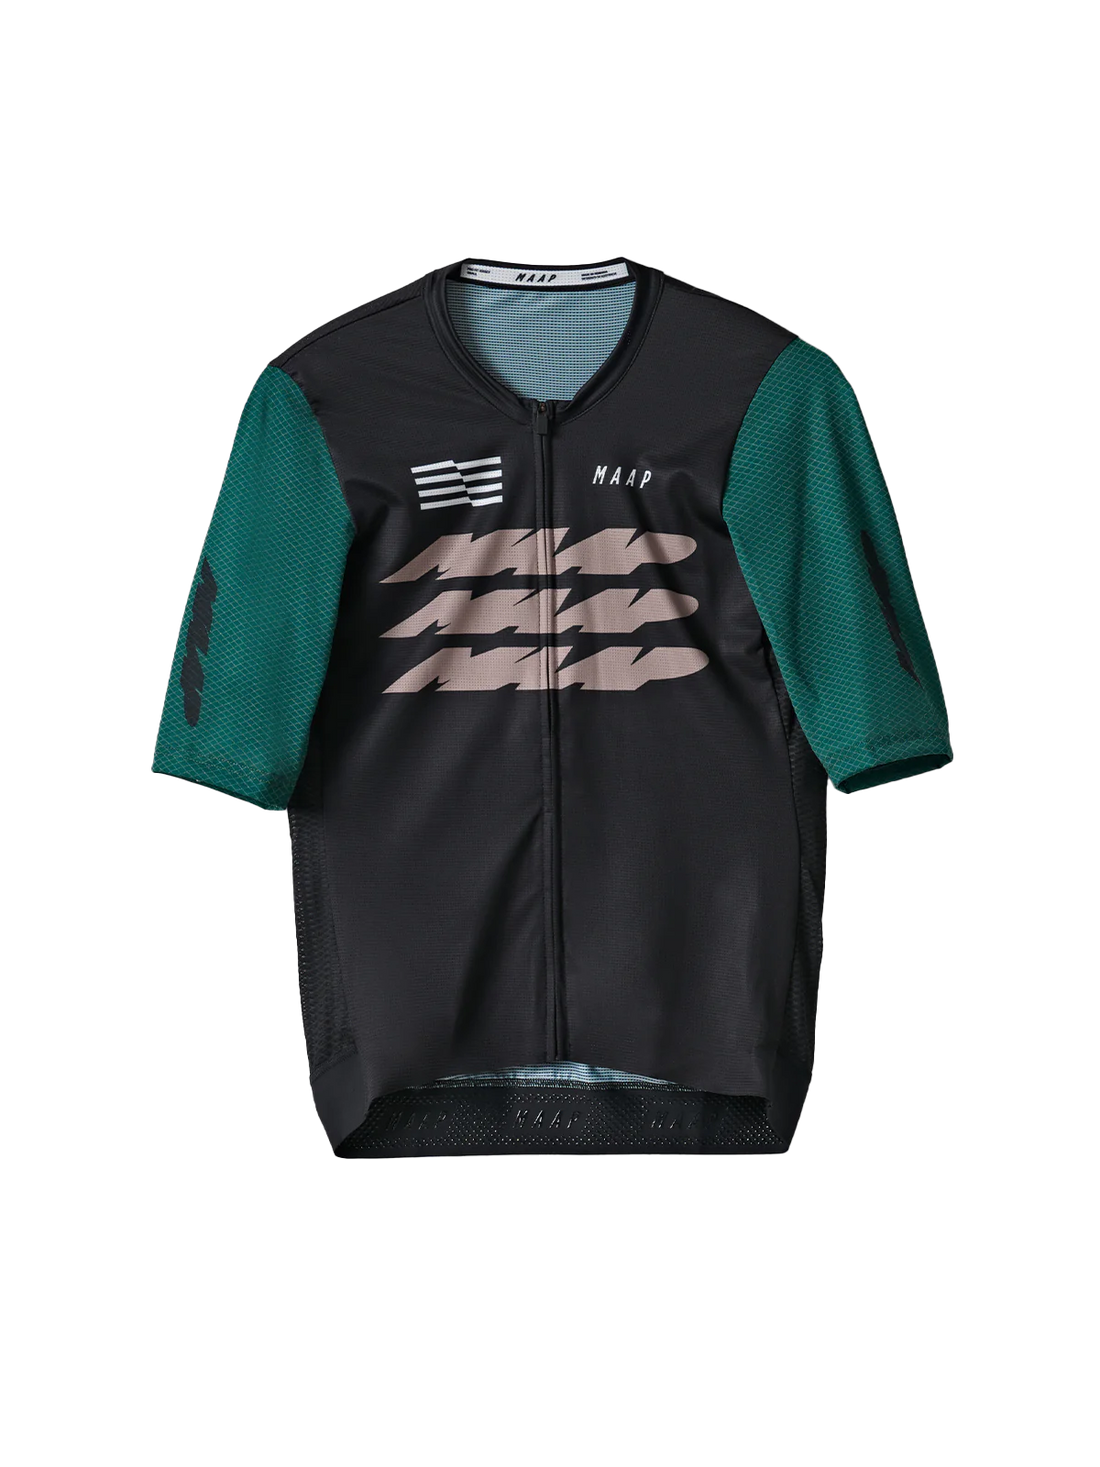 Eclipse Pro Air Jersey 2.0 - Black/Abyss